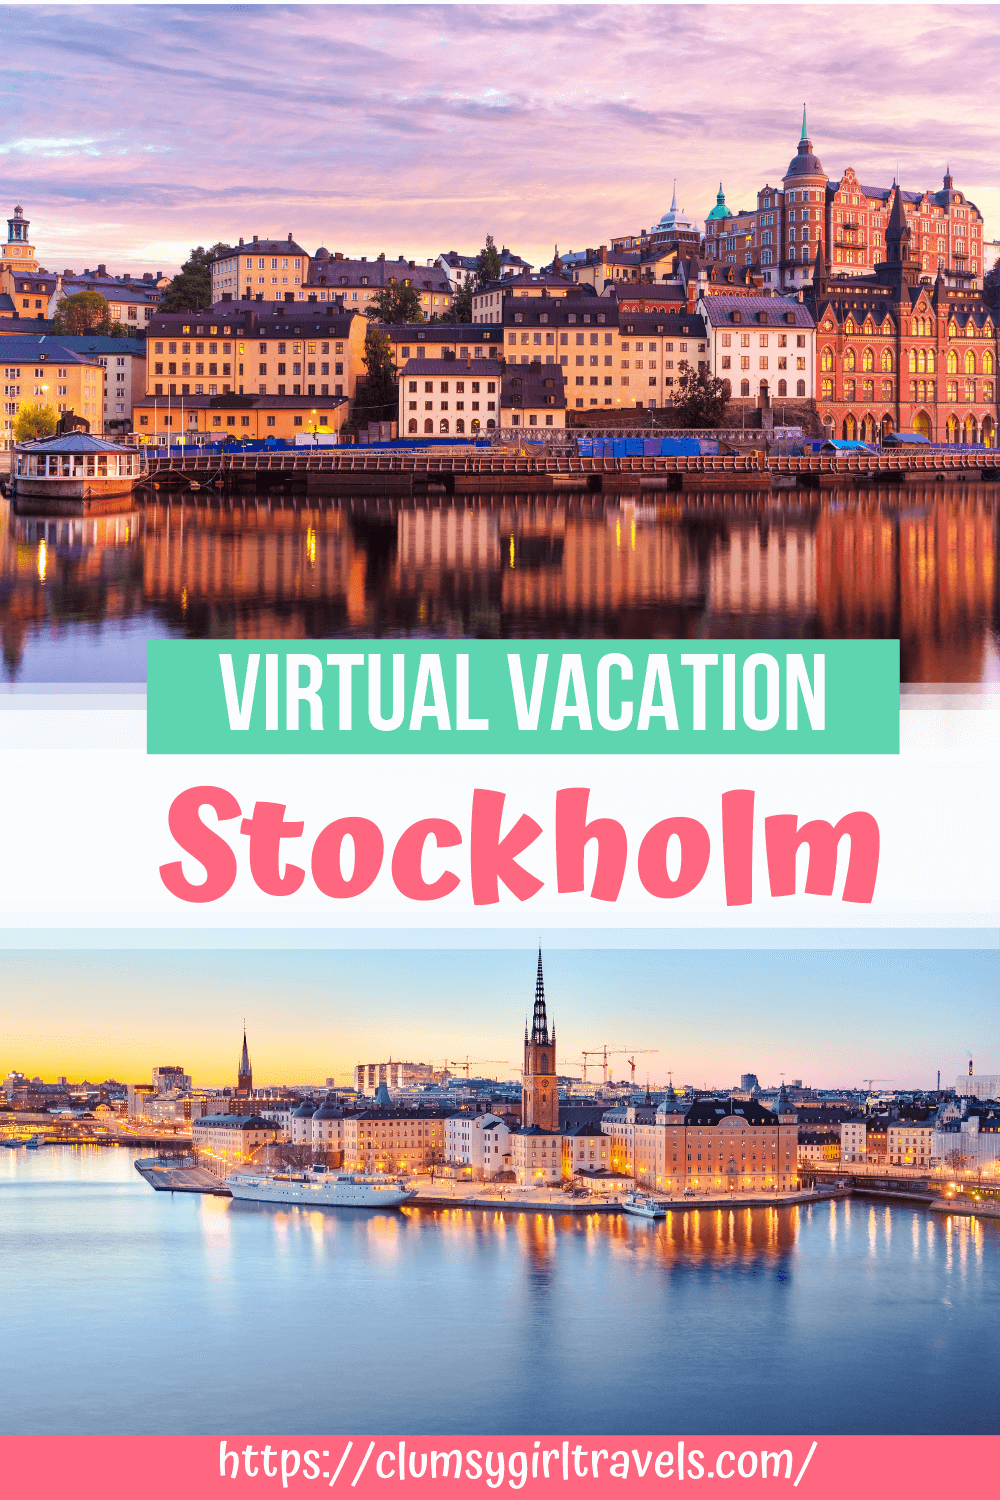 Stockholm is a beautiful city with so much to explore and with this virtual travel guide you can "visit" without actually being there. Take a Stockholm city tour, indulge in delicious Swedish food and explore some fascinating museums!